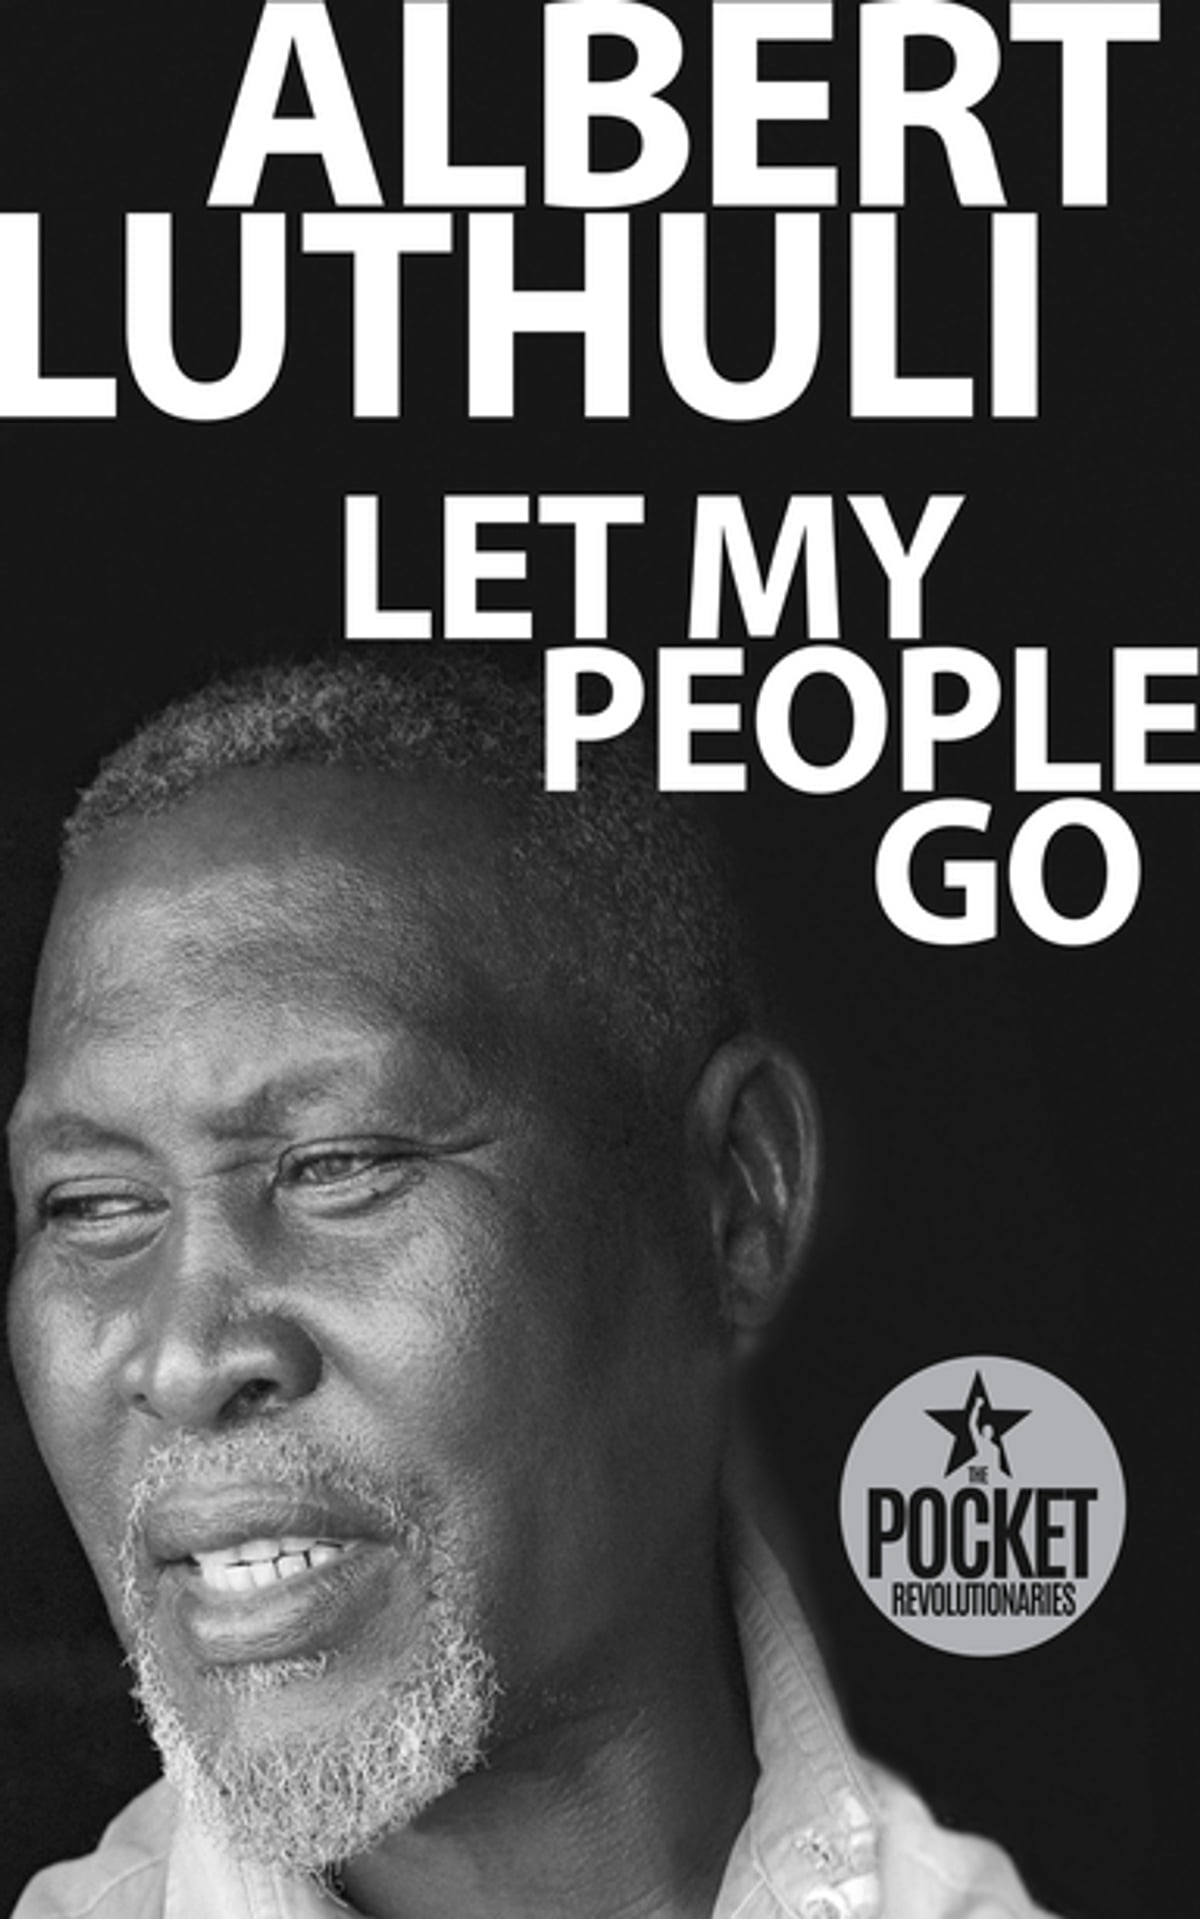 Let My People Go by Albert Luthuli